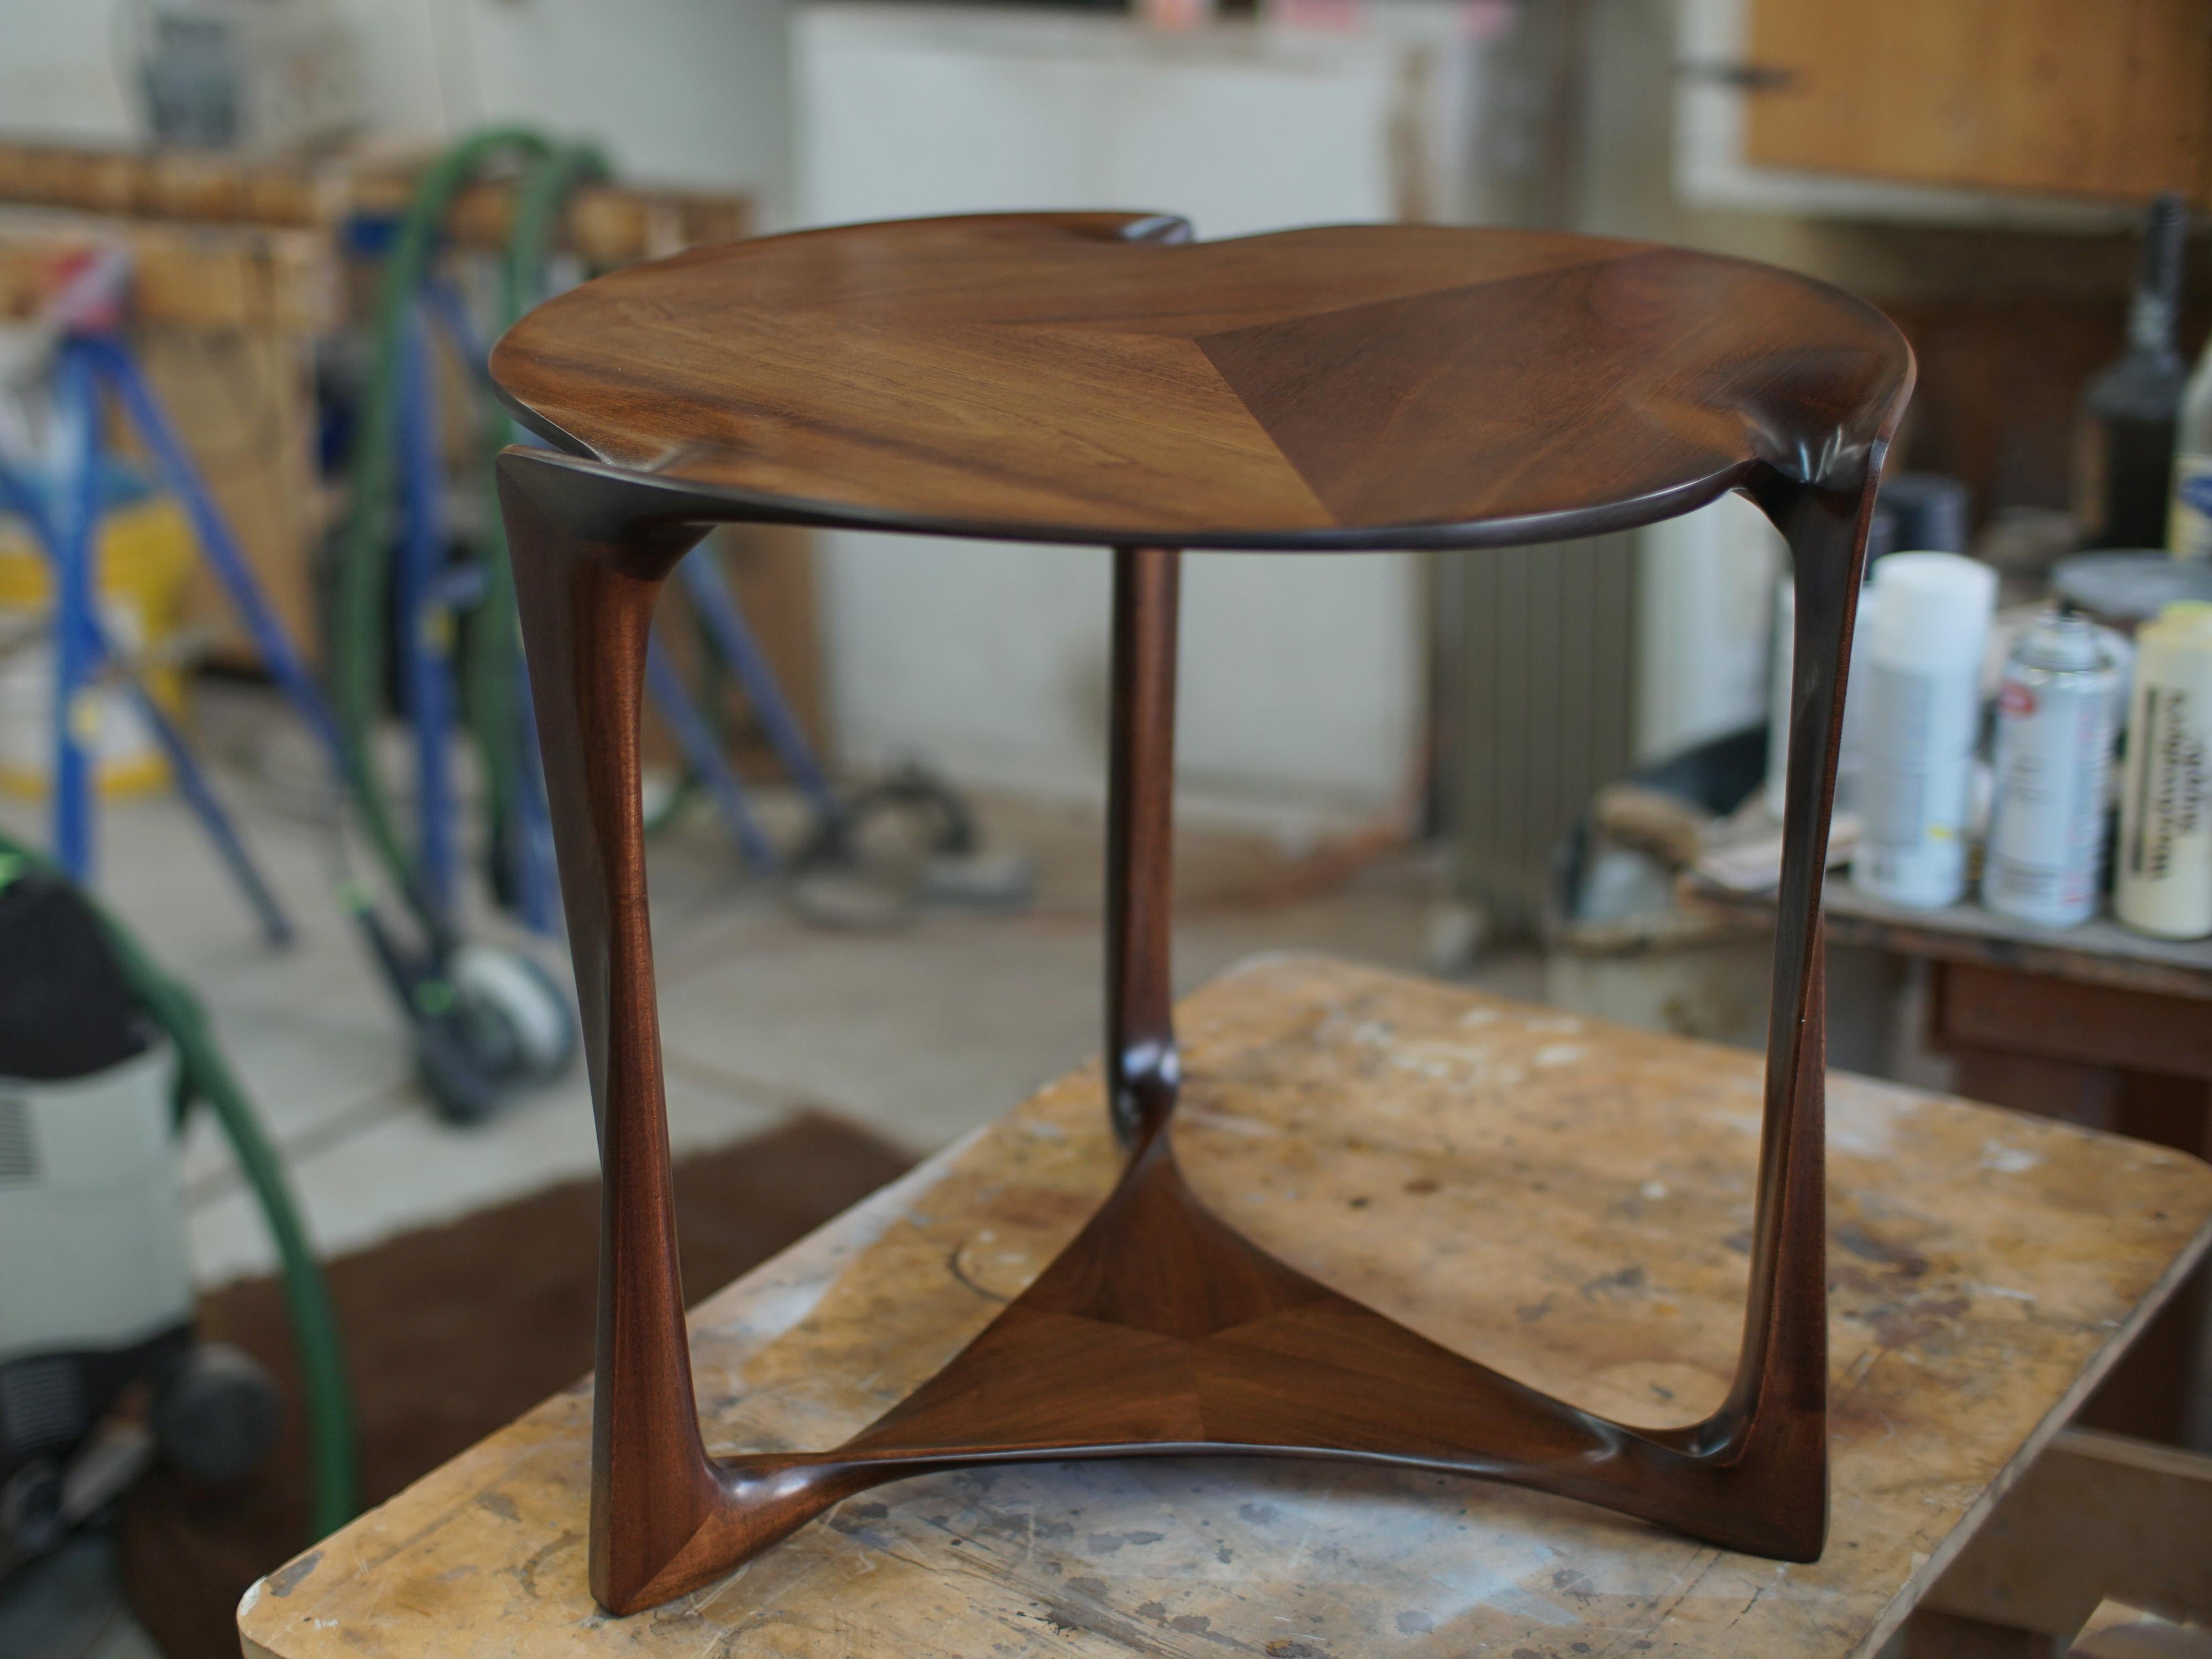 The Classic geometry of this little table, a round top over a triangular shelf or stretcher assembly, supported by three legs, is given a sculpted, organic form employing traditional carving techniques not seen since the great masters of Art